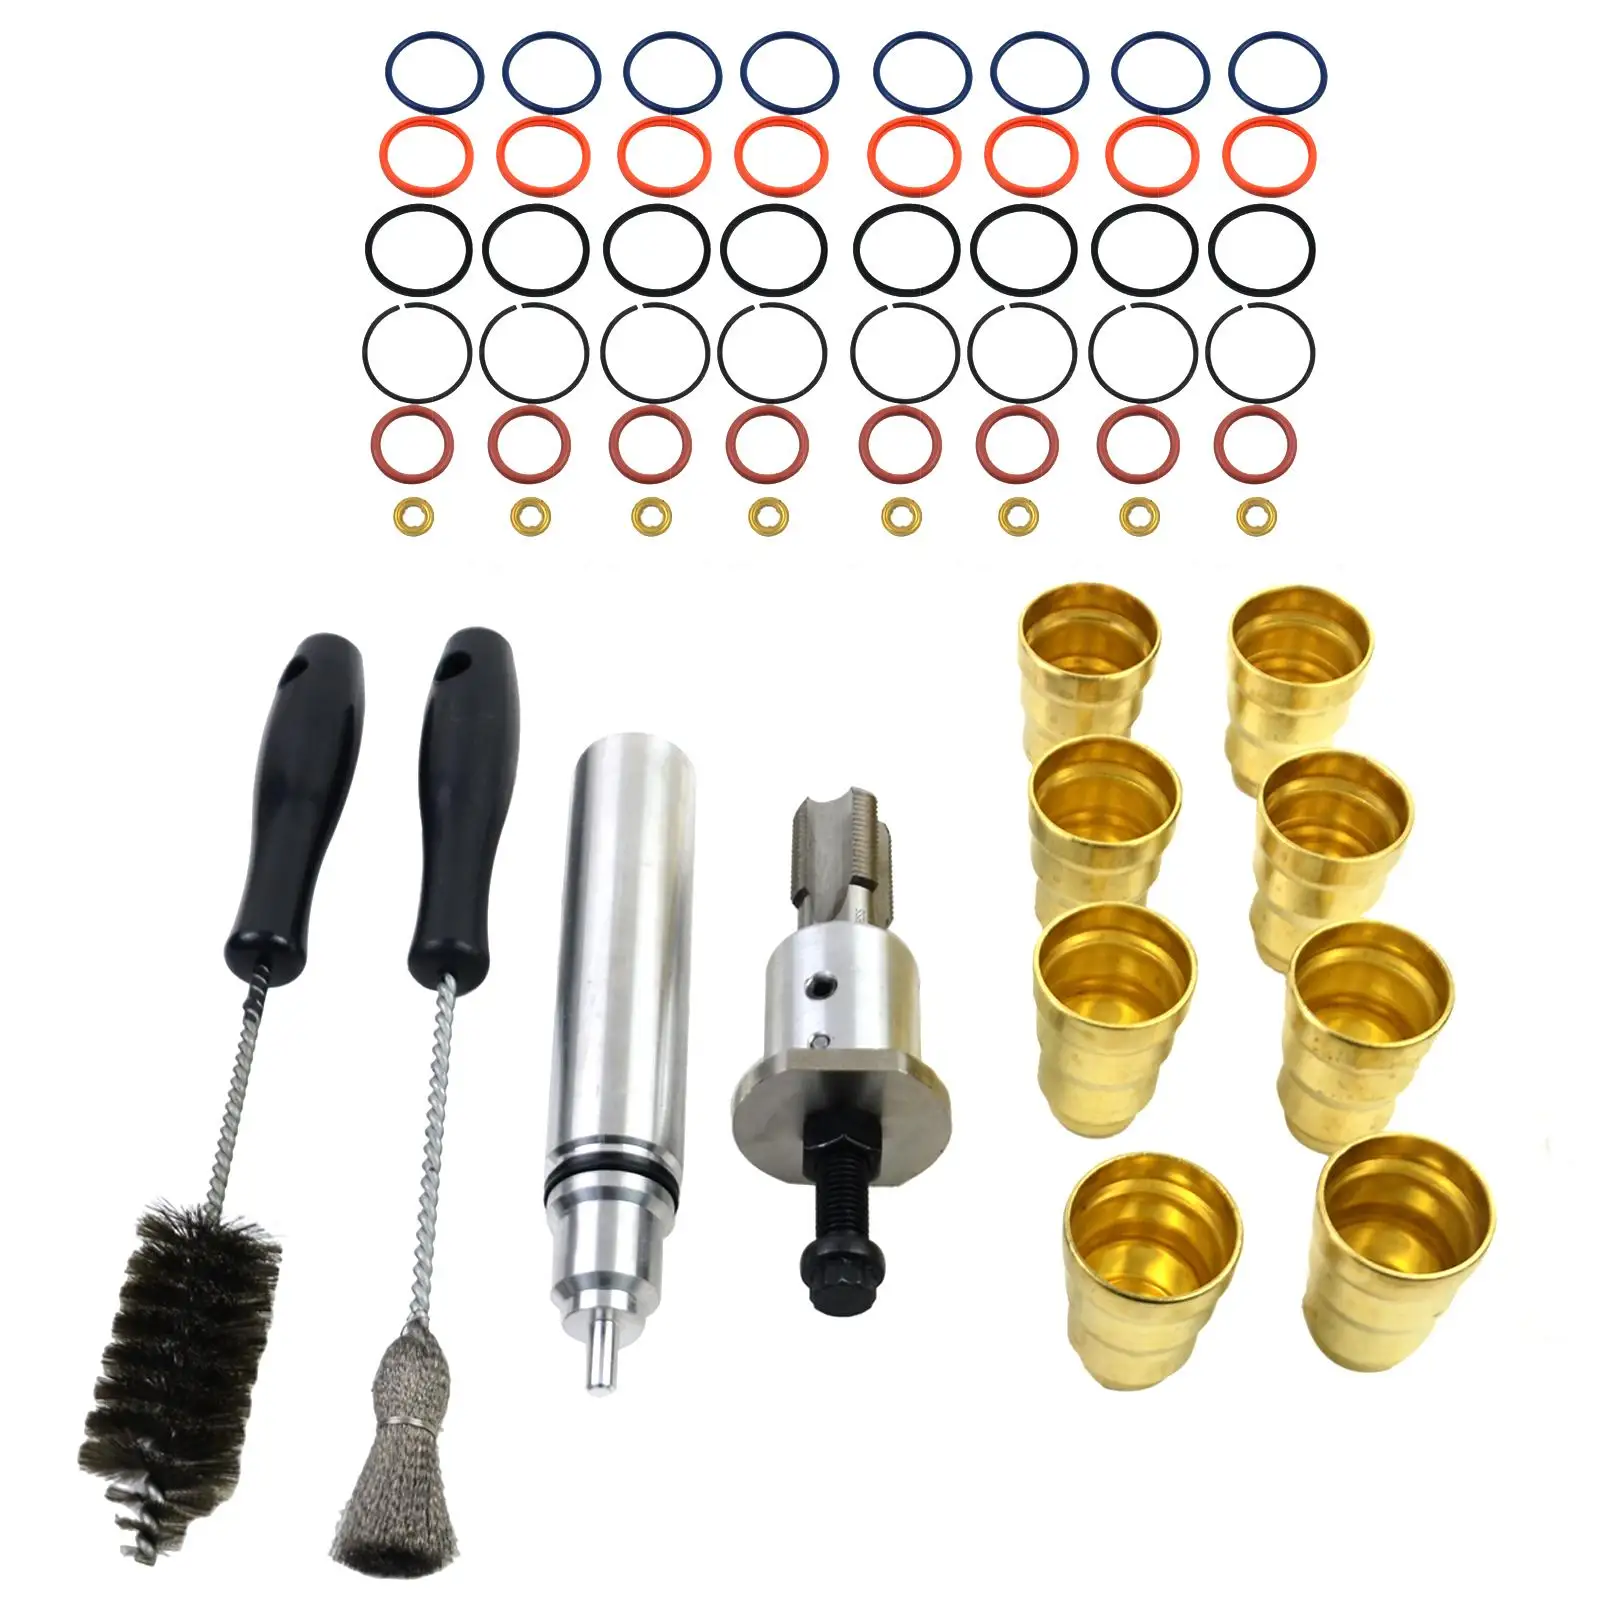 

AP03 For Ford Excursion F250 F350 F450 F550 7.3L 1994-2003 Injector Sleeve Cup Removal Tool Install Kit F4TZ9F538A